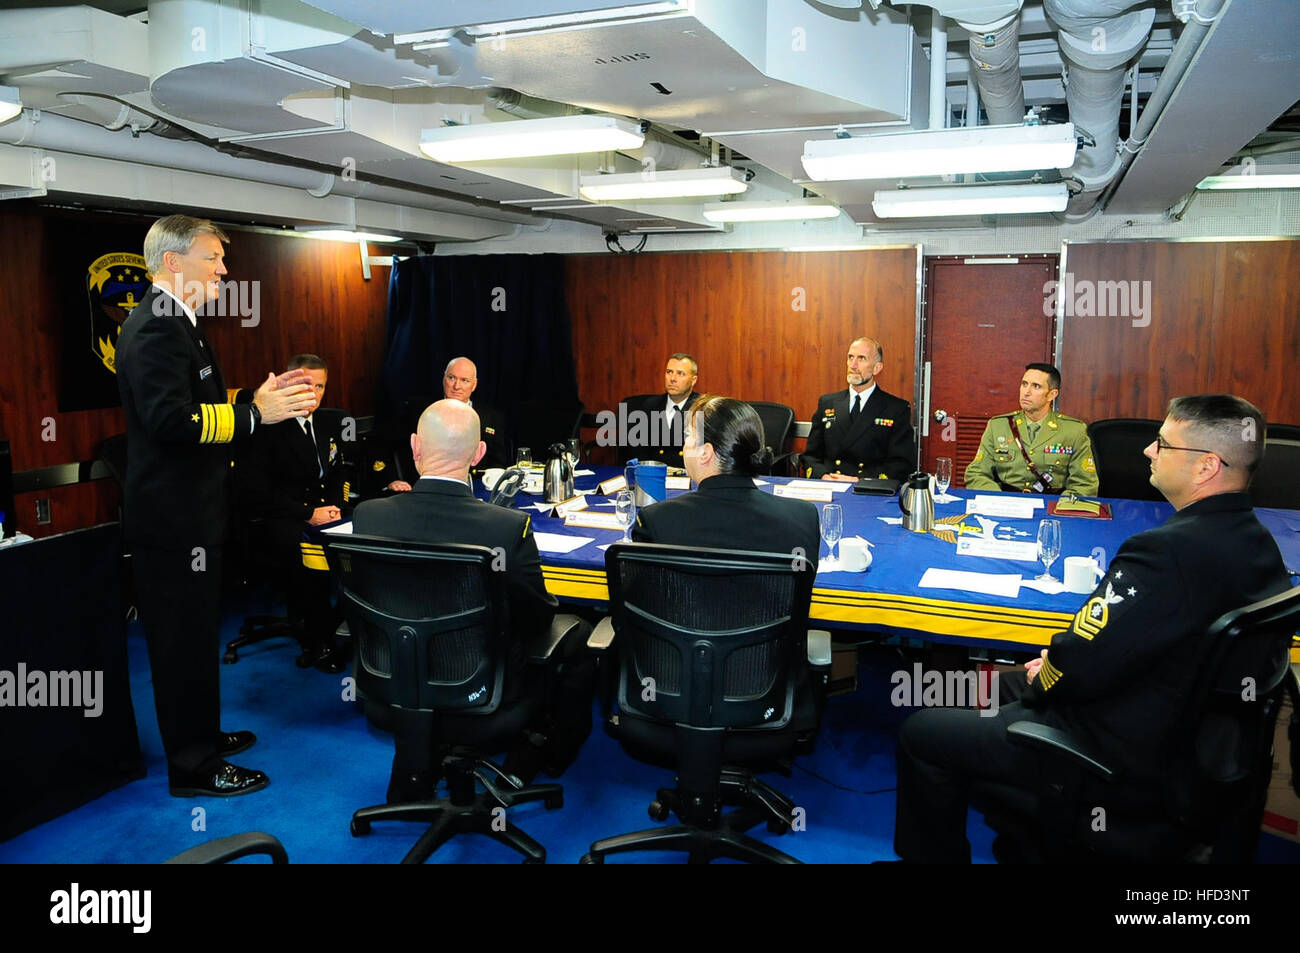 150704-N-GR655-025 SYDNEY, Australia (July 4, 2015) – Vice Adm. Robert L. Thomas, commander, U.S. 7th Fleet, speaks with senior navy and army enlisted leaders from Australia, New Zealand and the U.S 7th Fleet during a senior enlisted “roundtable” aboard the U.S. 7th Fleet flagship USS Blue Ridge (LCC-19) before the start of the Australia-U.S. exercise Talisman Saber 2015. Talisman Saber is a biennial combined joint exercise designed to improve Australian and U.S. combat readiness and interoperability, maximize combined training opportunities and demonstrate U.S. resolve to support the security Stock Photo